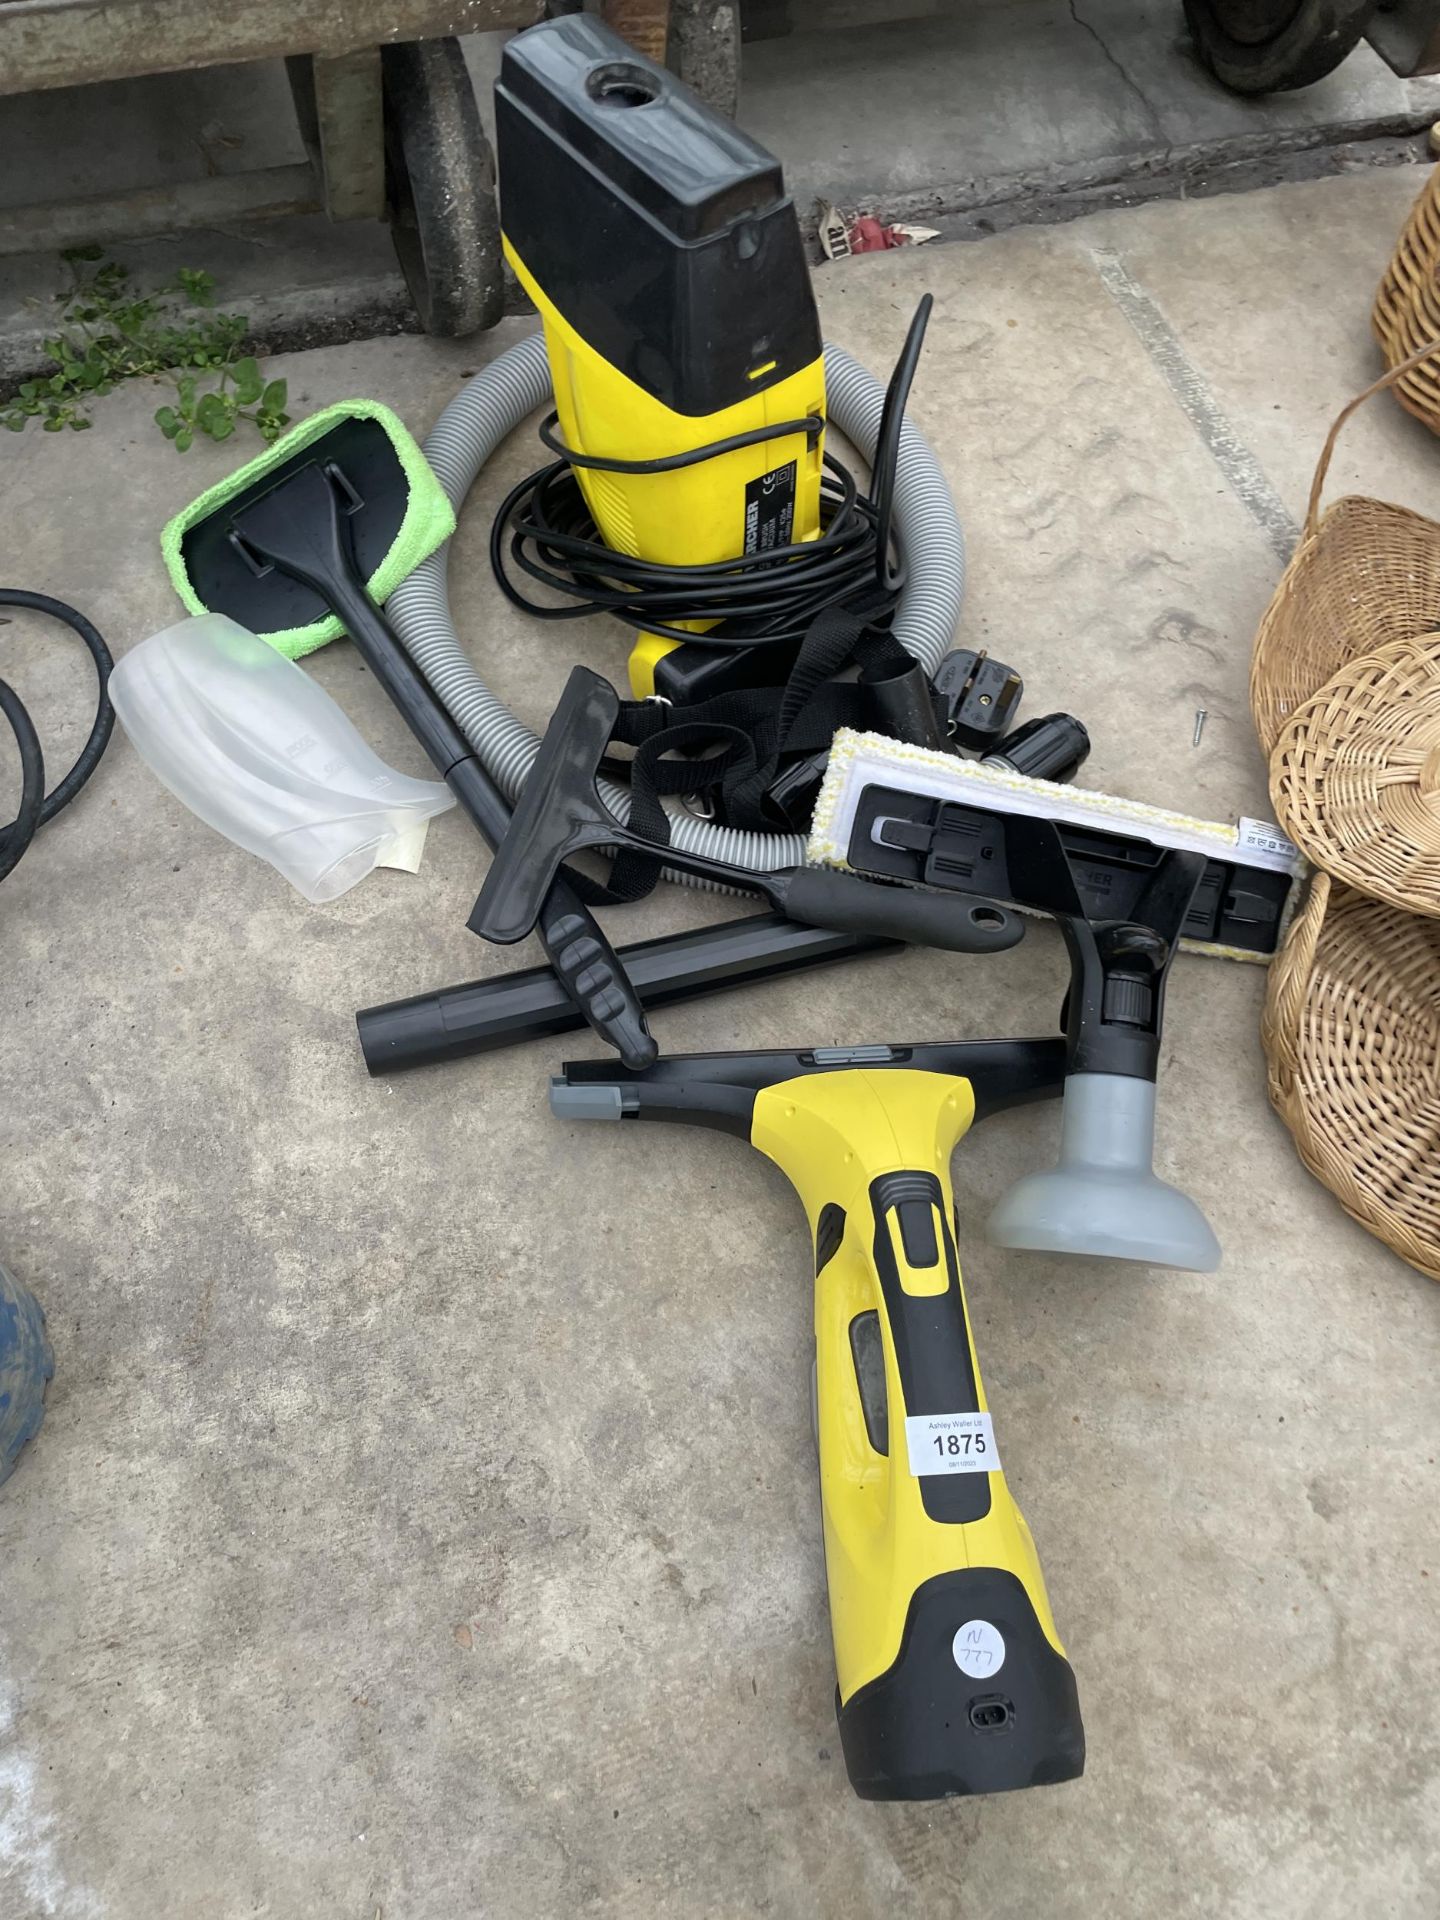 A KARCHER STEAM CLEANER AND A KARCHER WINDOW CLEANER